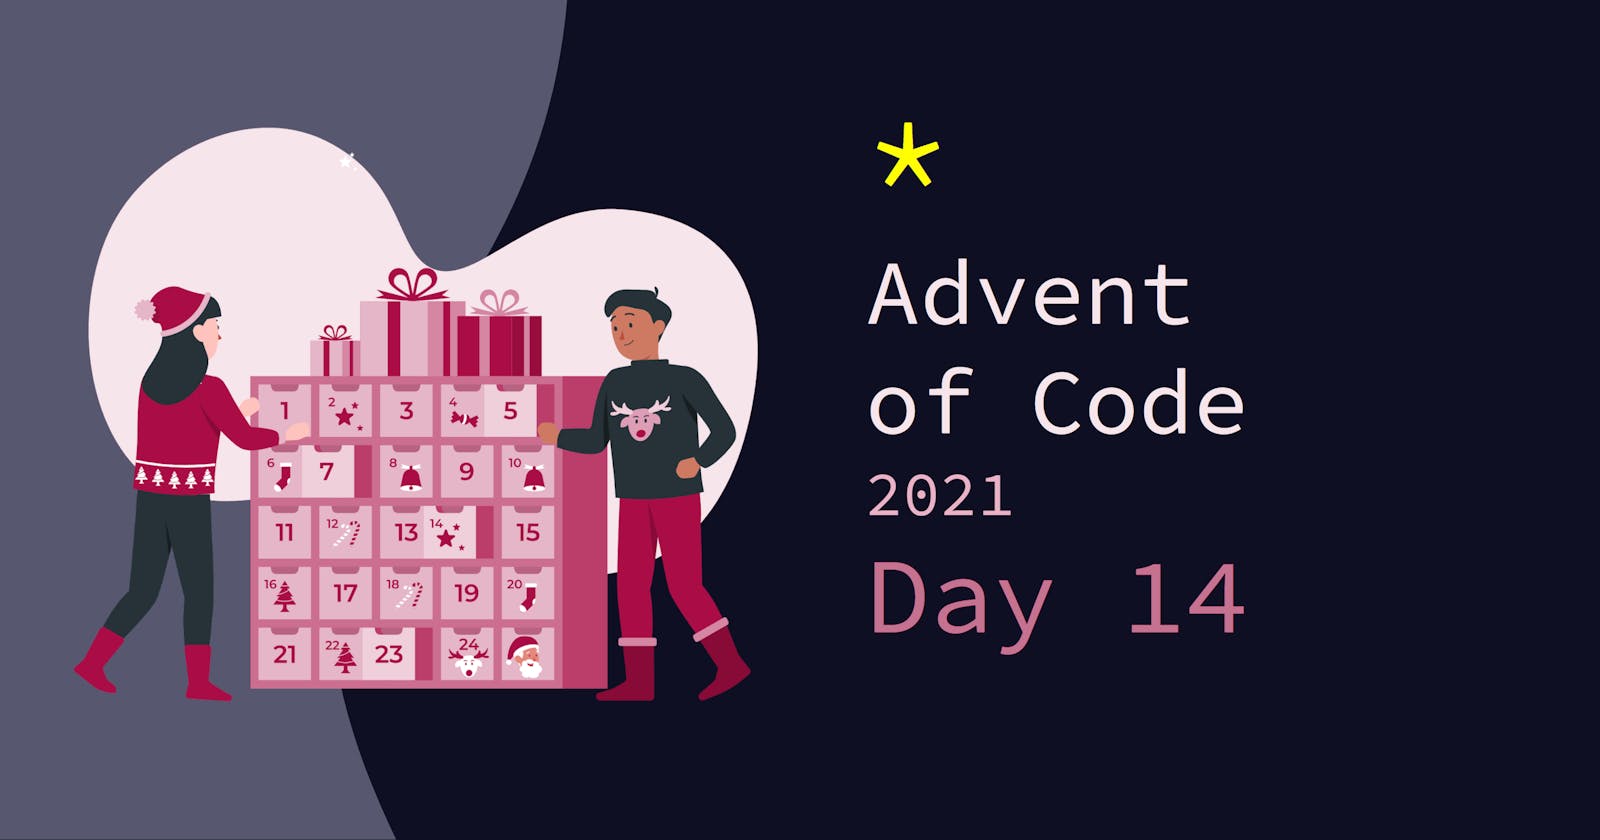 Advent of Code 2021: Day 14